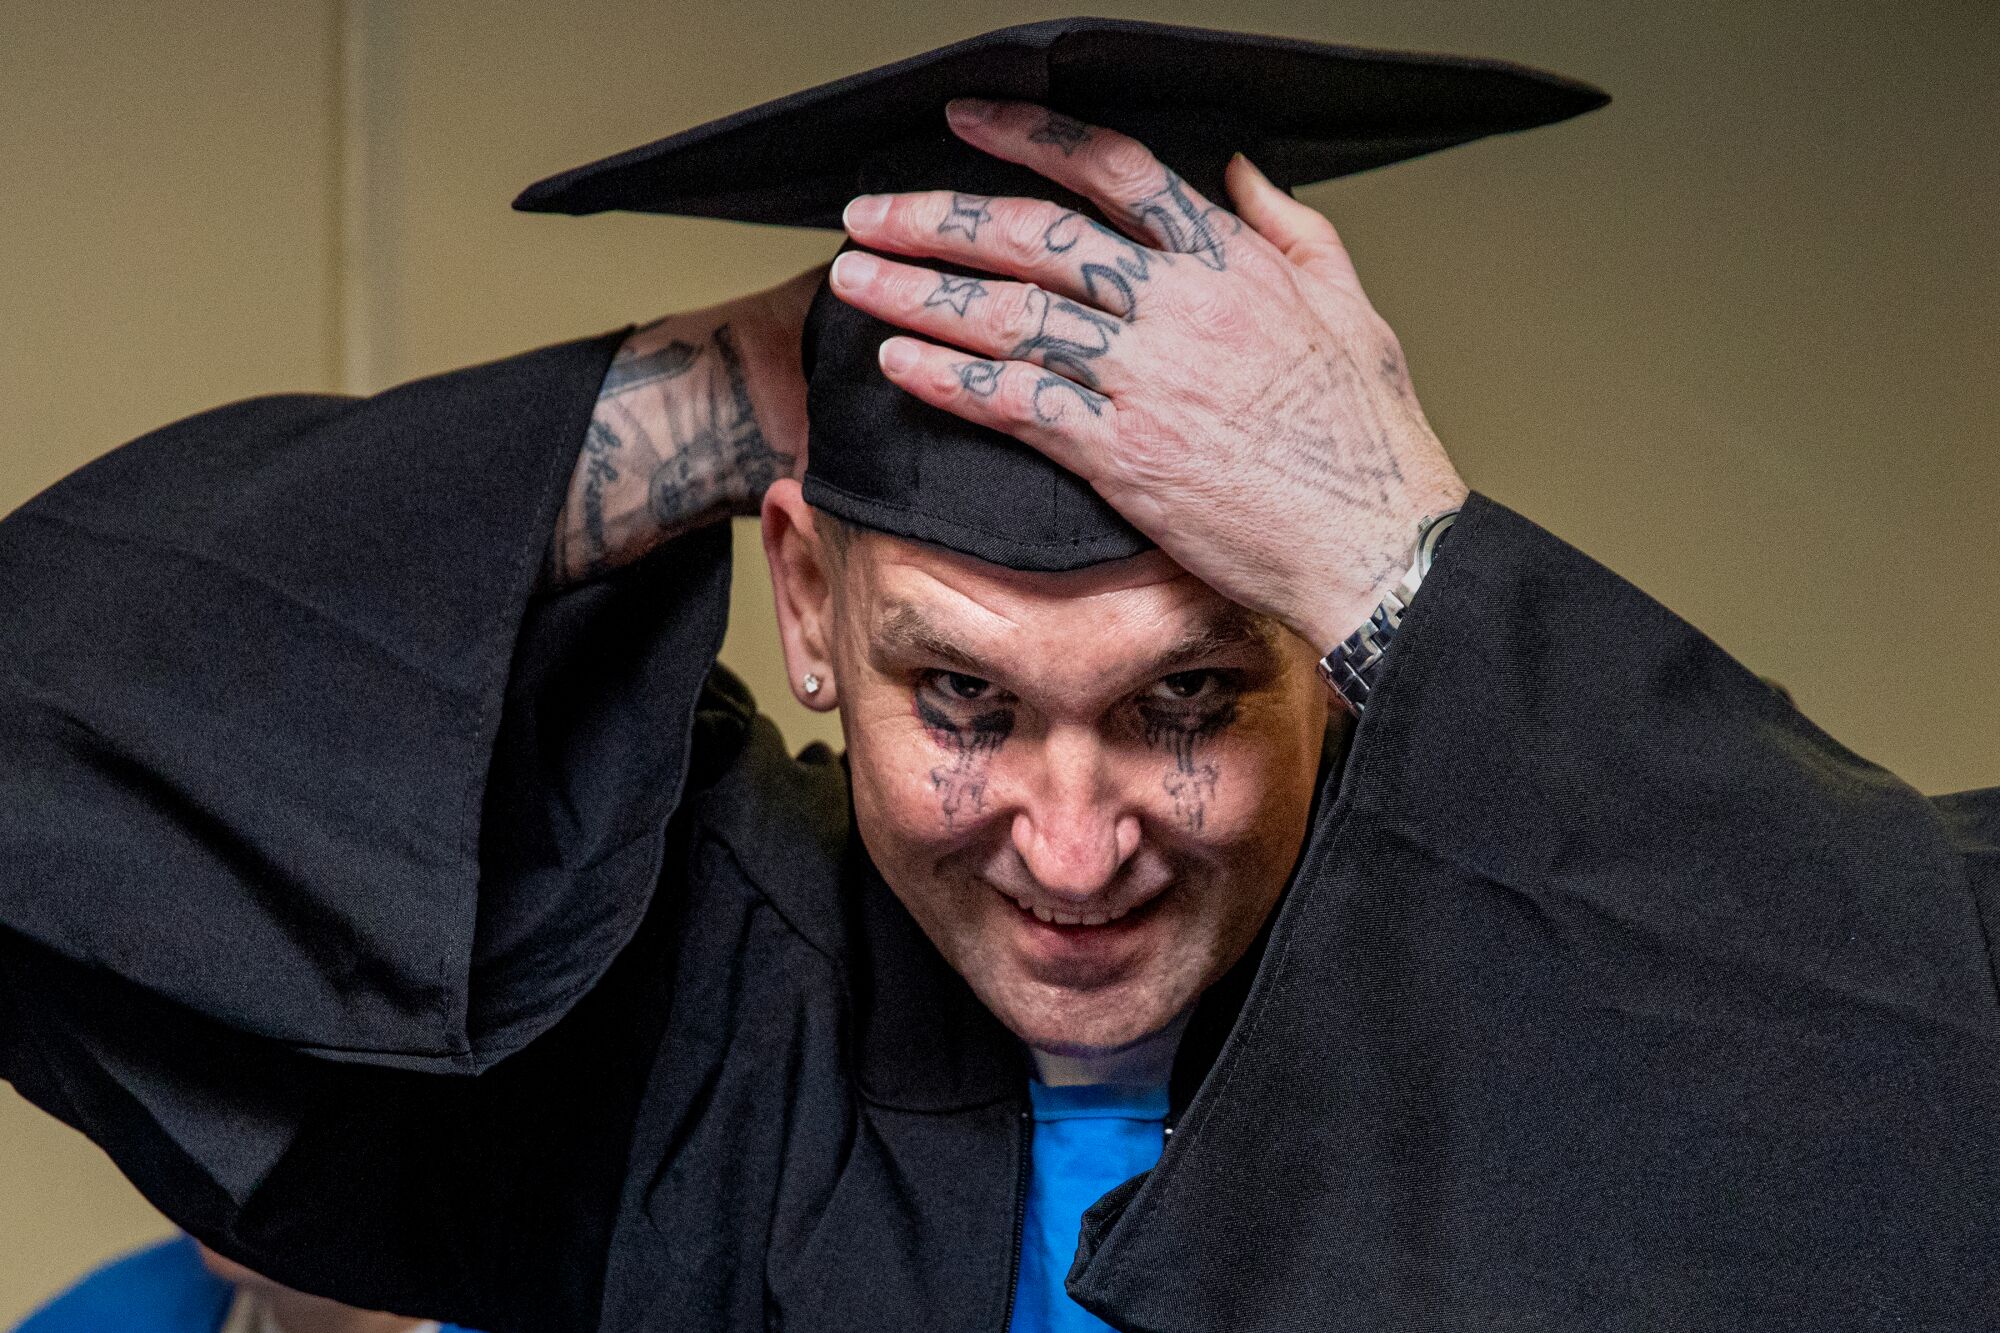 The man with tattoos on his face and hands looks into the camera as he adjusts his black graduation cap. 